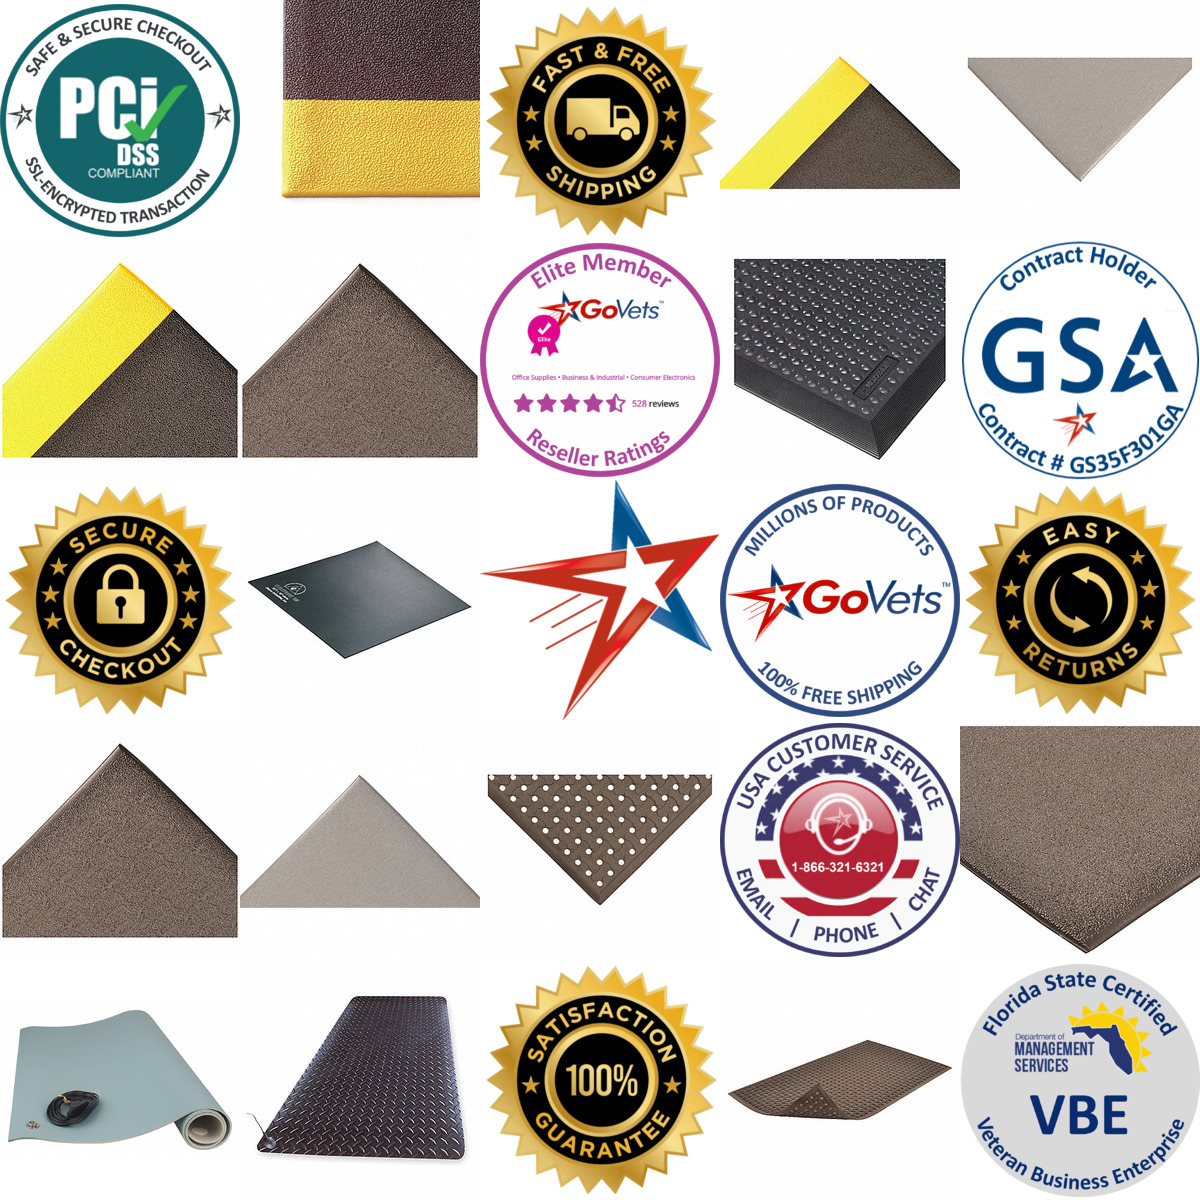 A selection of Esd Mats products on GoVets